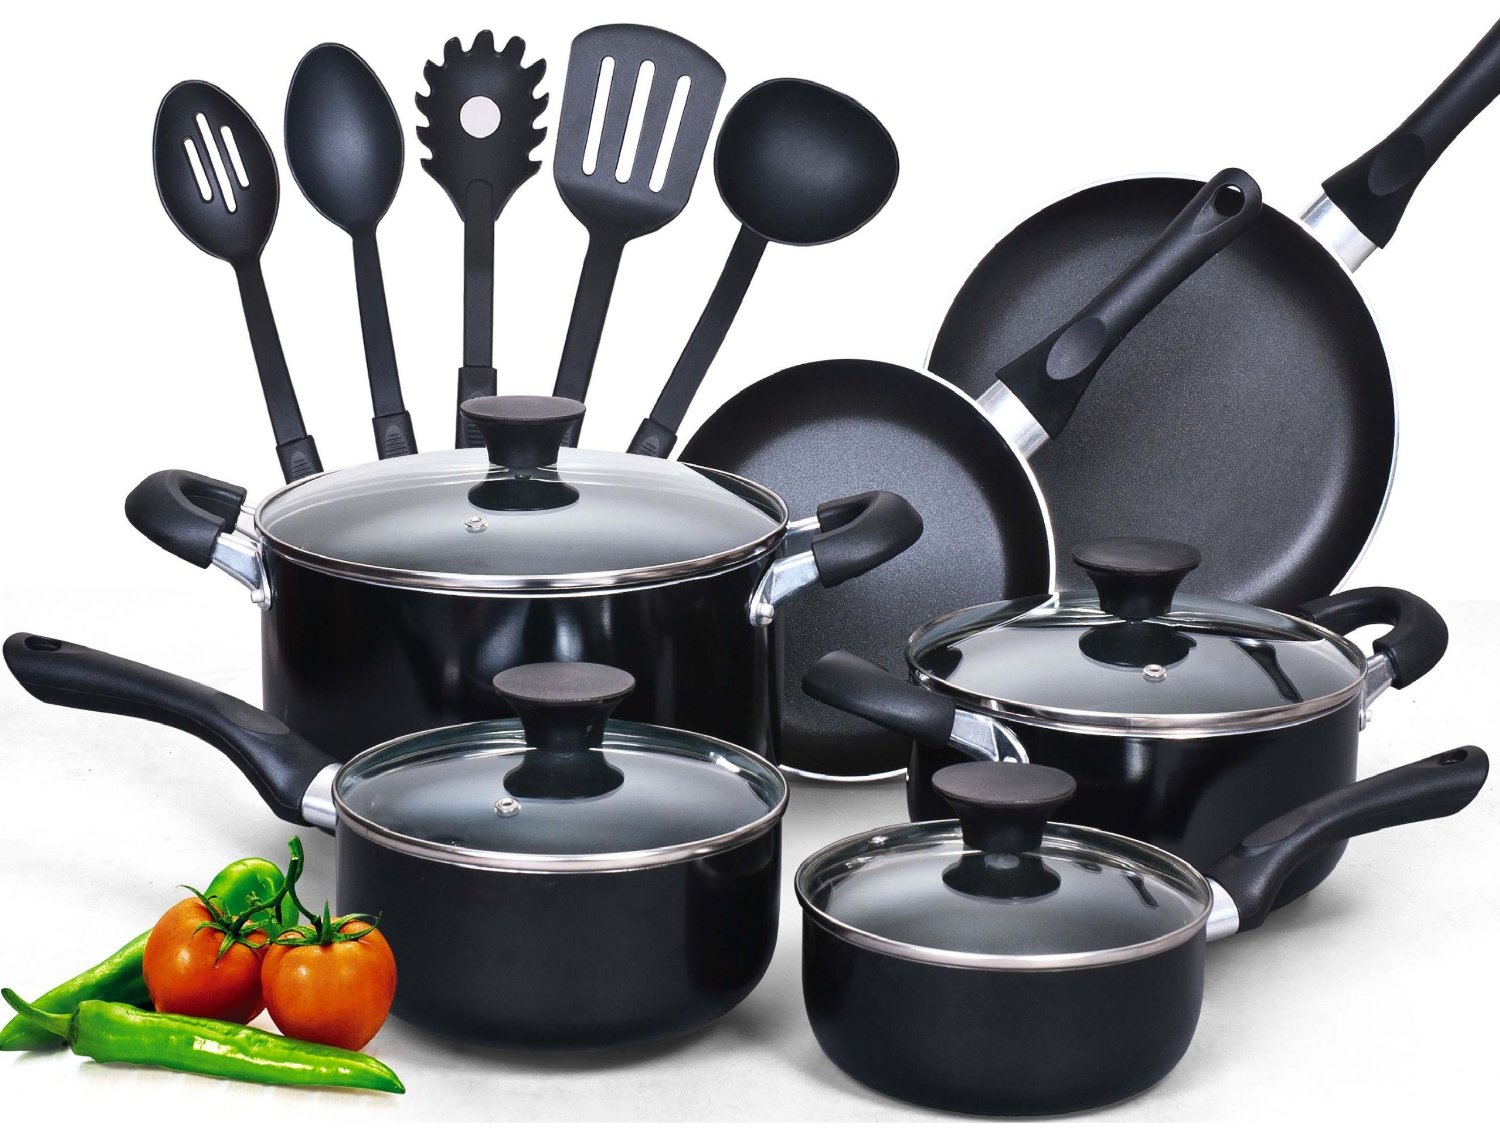 stainless steel pots and pans set amazon